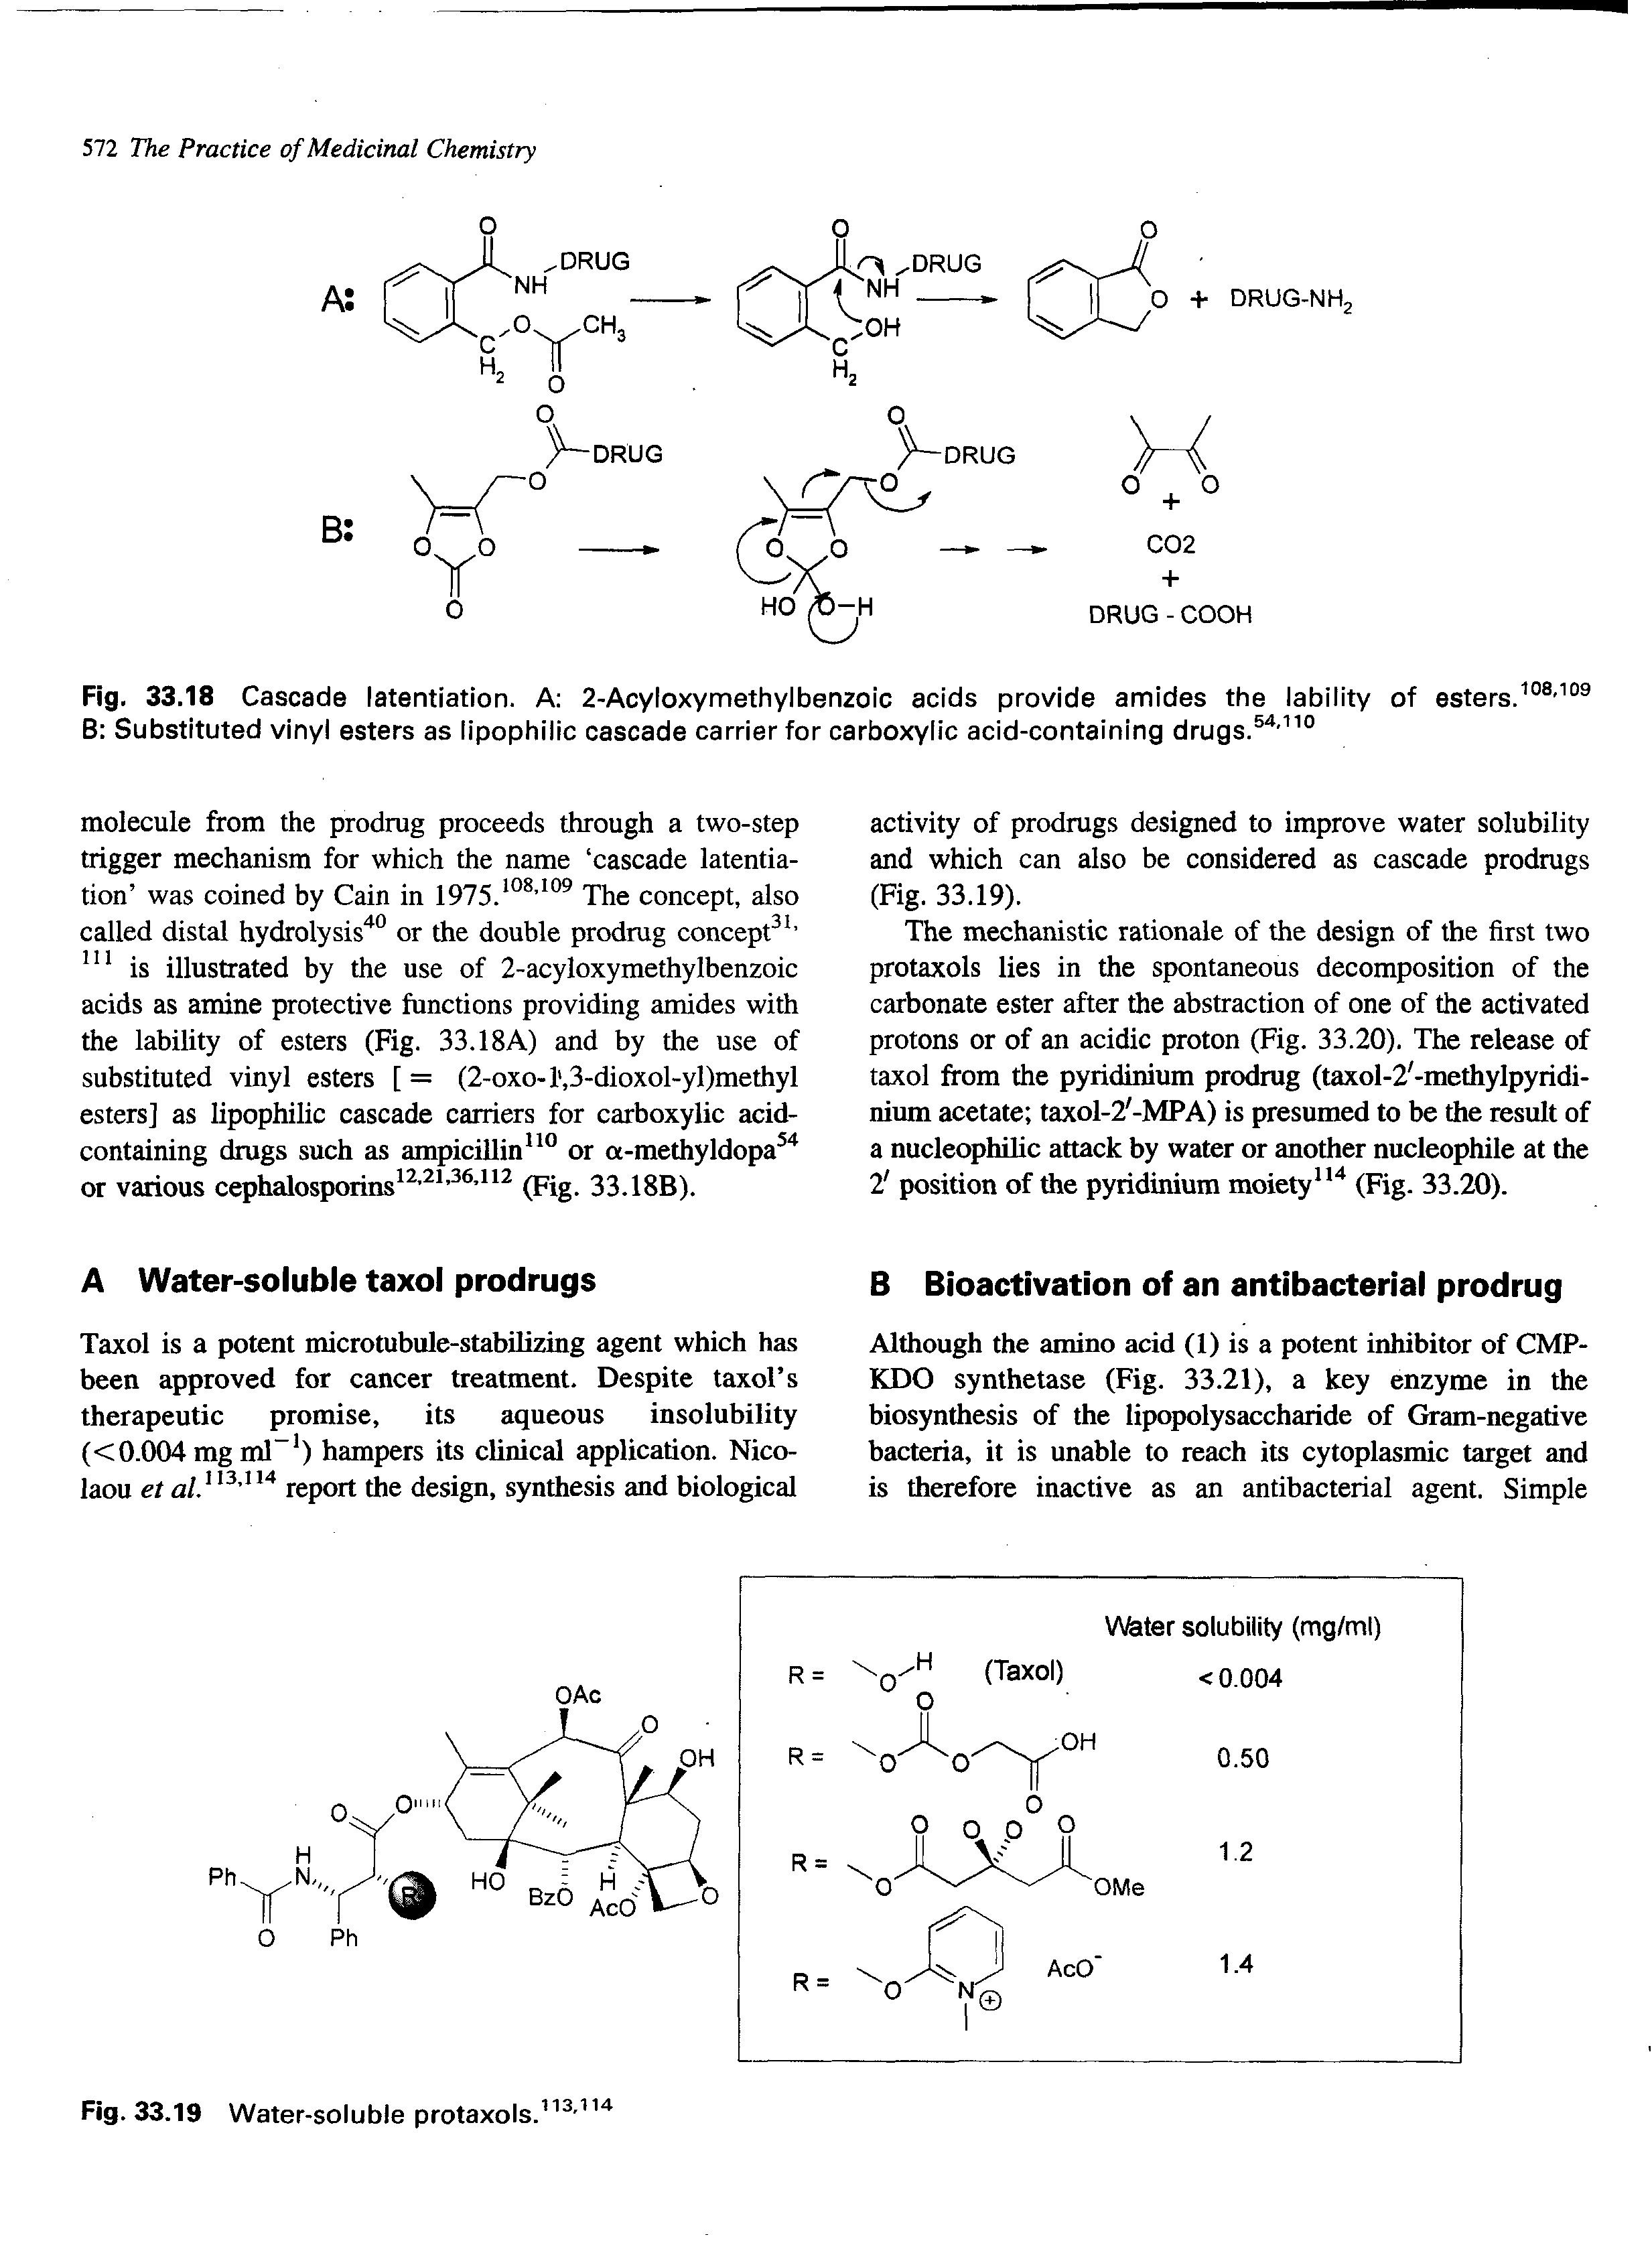 Fig. 33.18 Cascade latentiation. A 2-Acyloxymethylbenzoic acids provide amides the lability of esters. ° ° B Substituted vinyl esters as lipophilic cascade carrier for carboxylic acid-containing drugs.